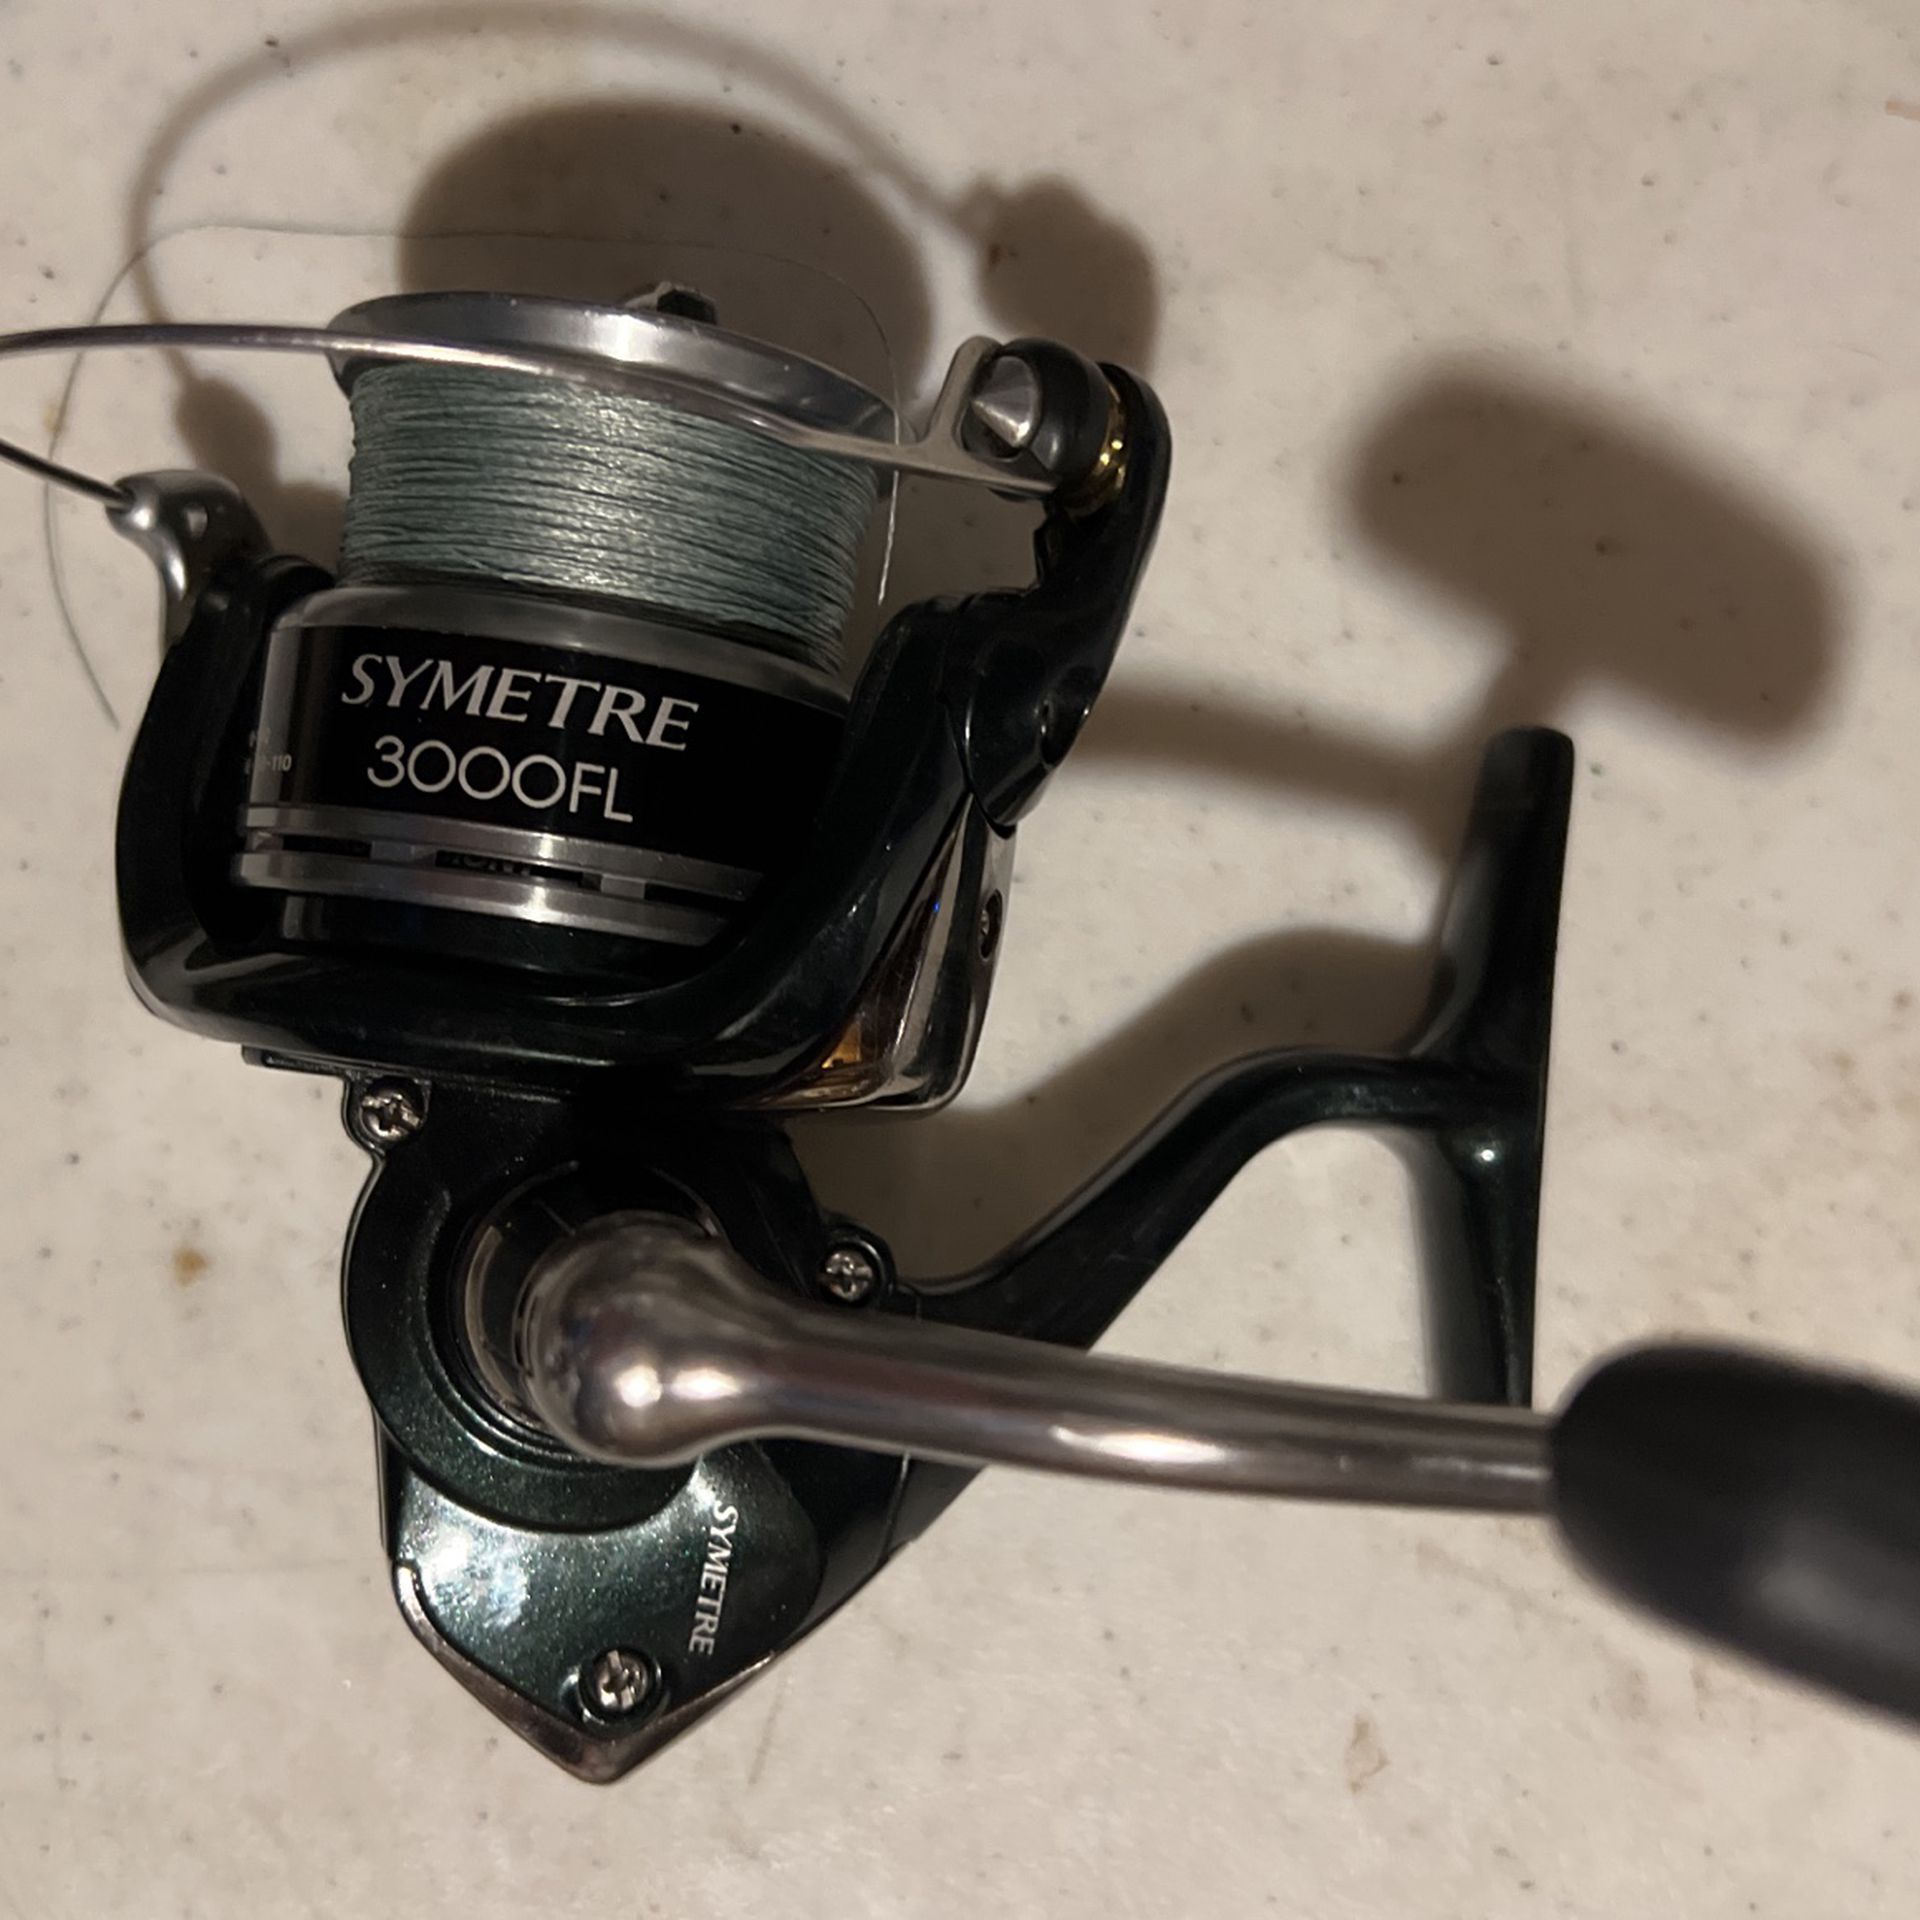 Shimano Symetre Spinning Reel for Sale in Bristol, CT - OfferUp